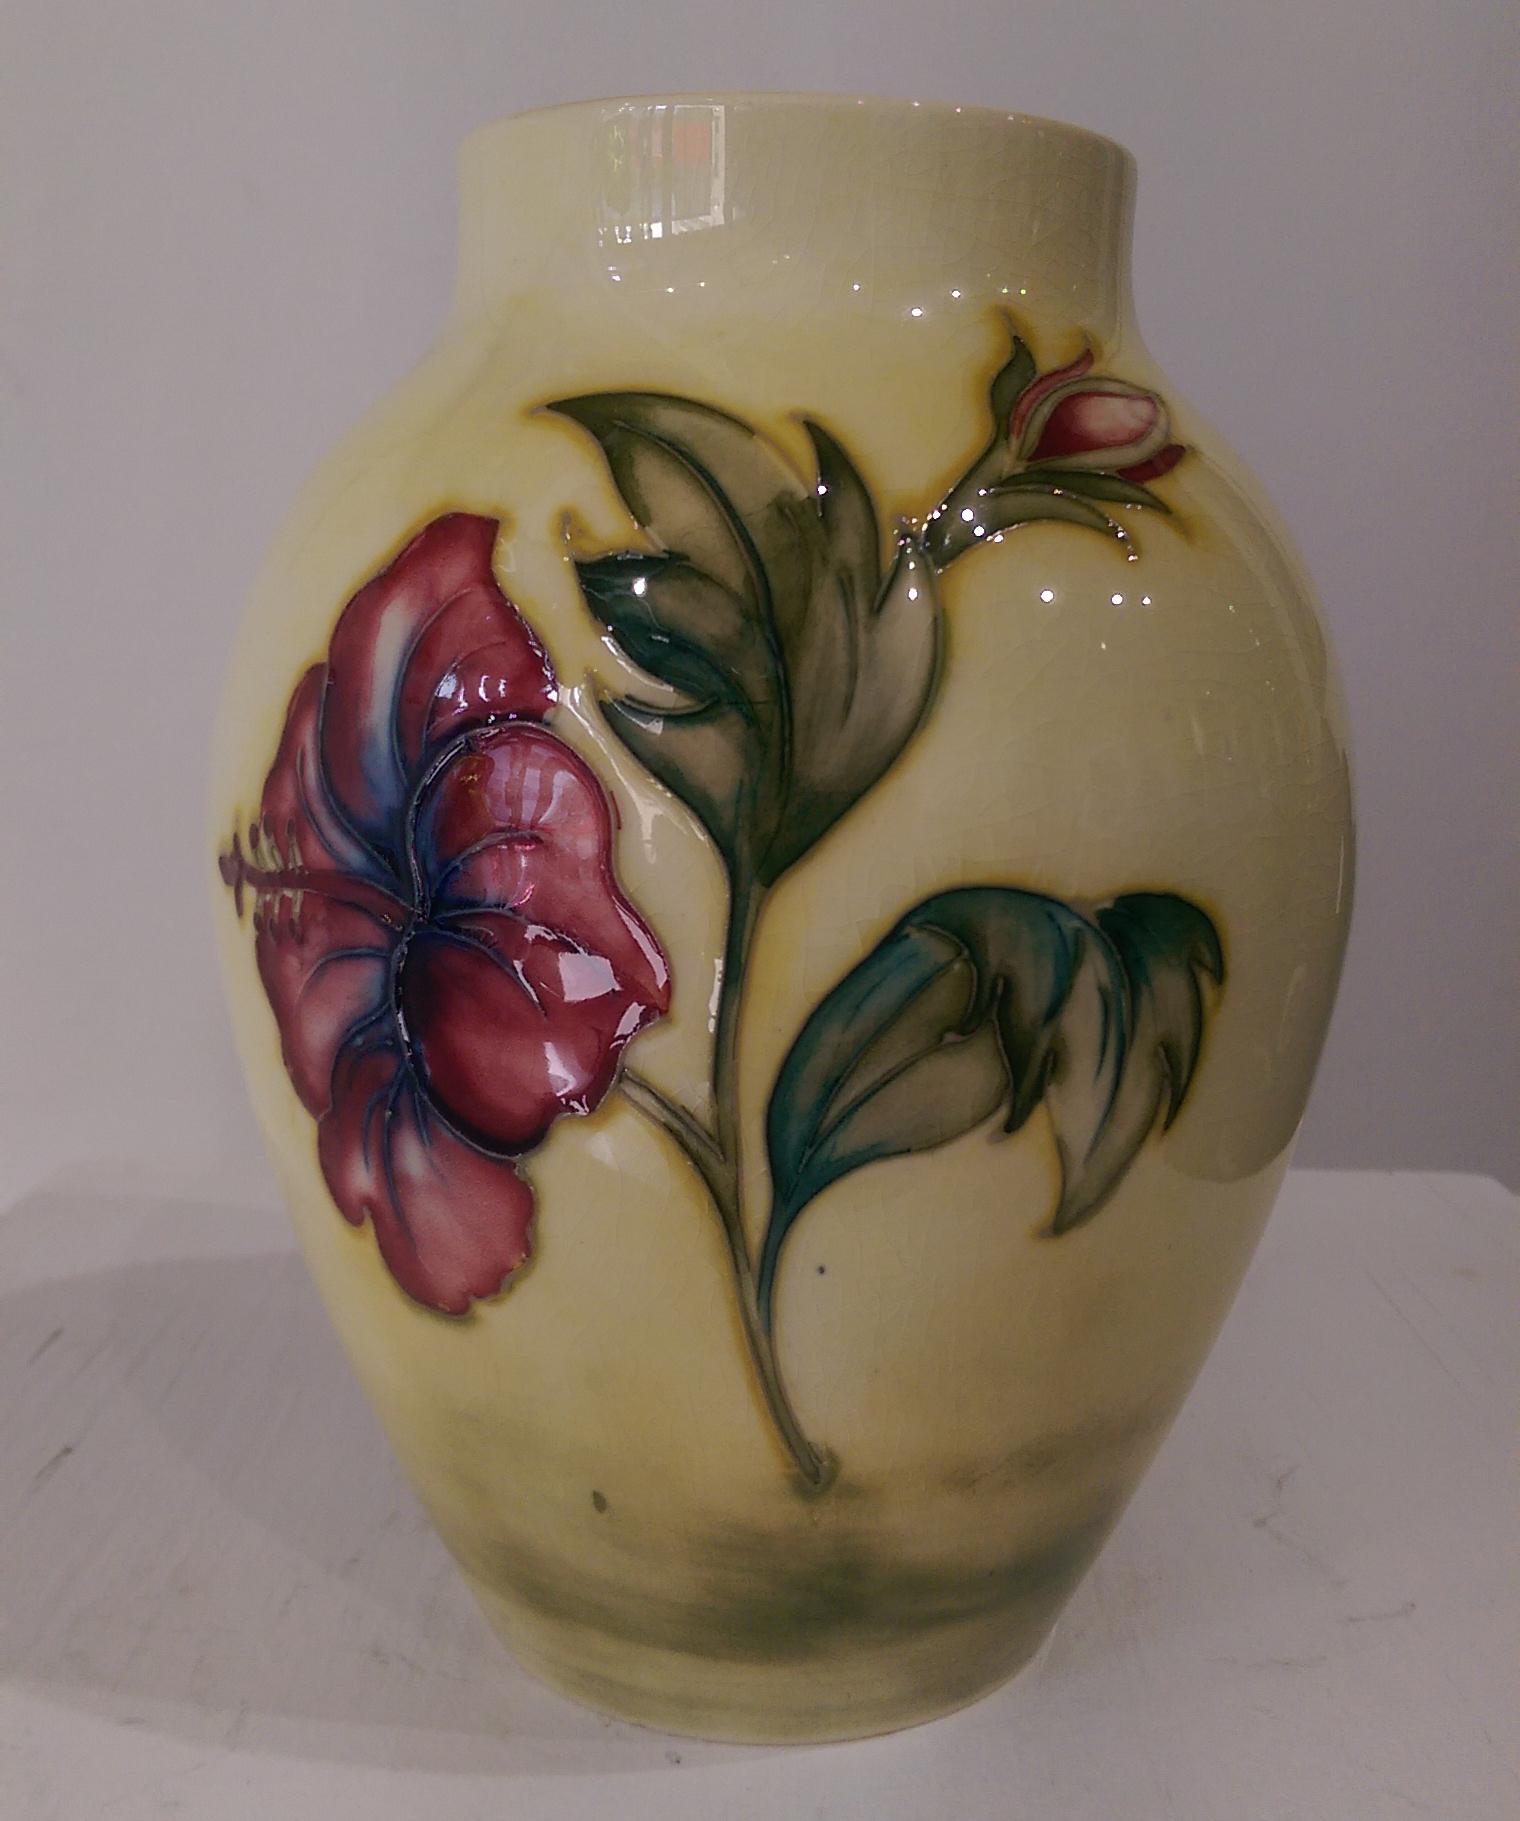 Beautiful vase of Ovoid form is decorated in the much sought after luscious hibiscus flowers in coral, pink, blue and yellow on a field of soft yellow. Measures approximate size: 7.5 inches high x diameter, top 3